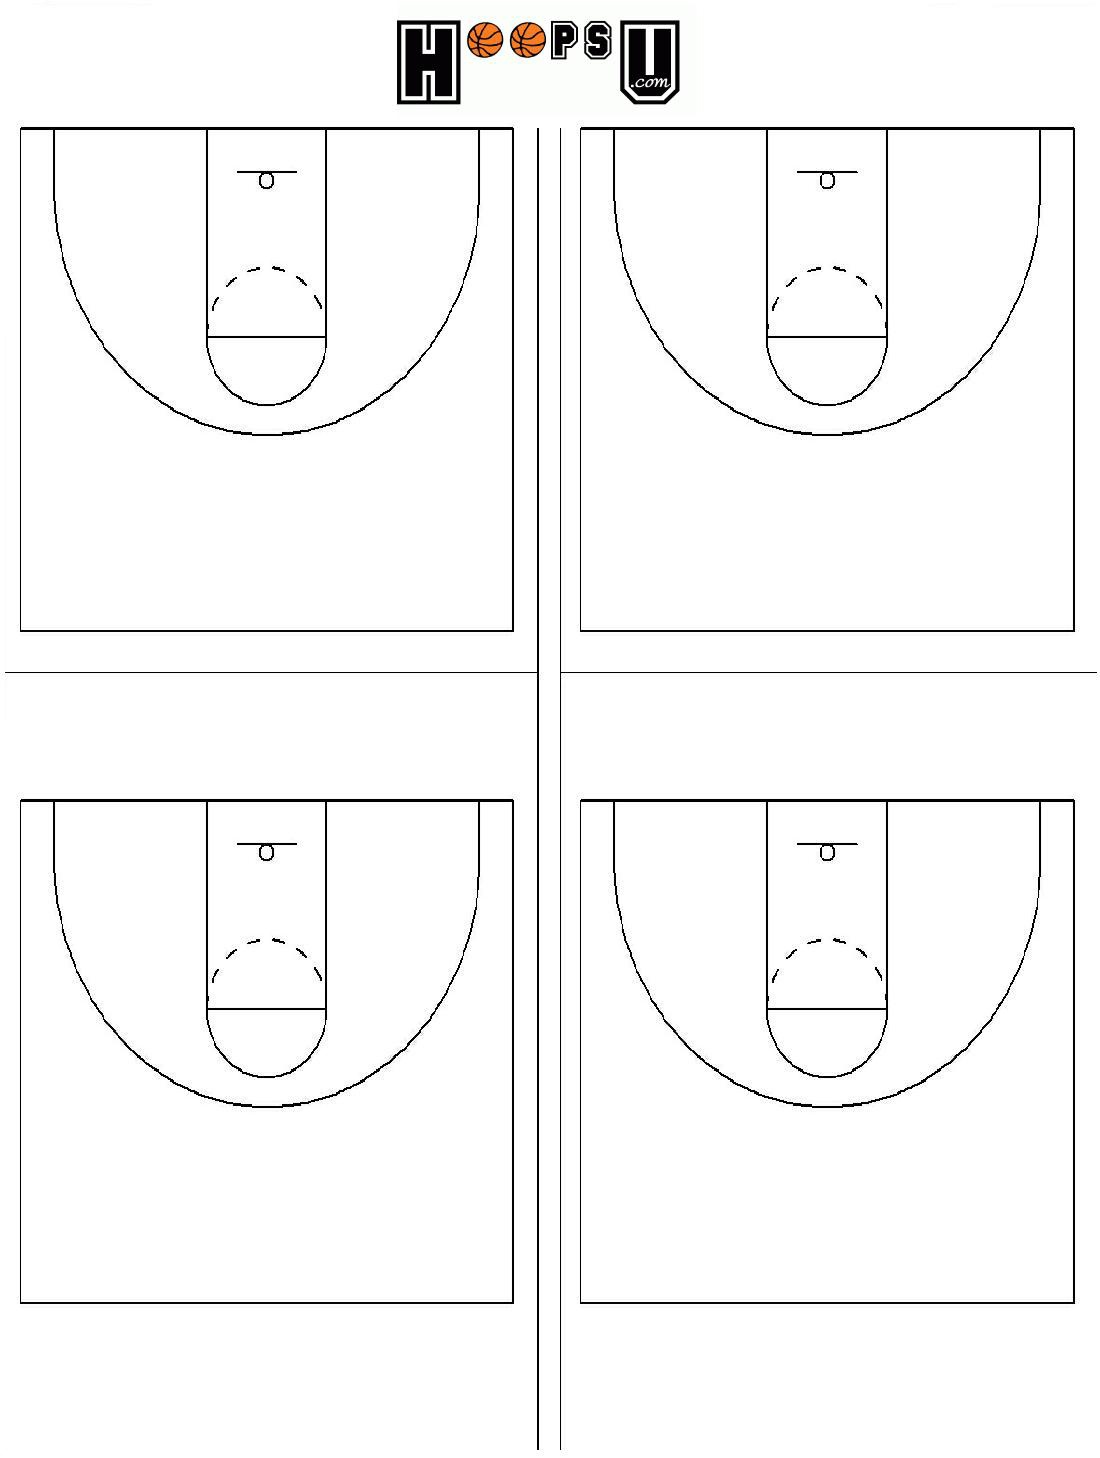 what-are-the-basketball-court-dimensions-diagrams-for-court-striping